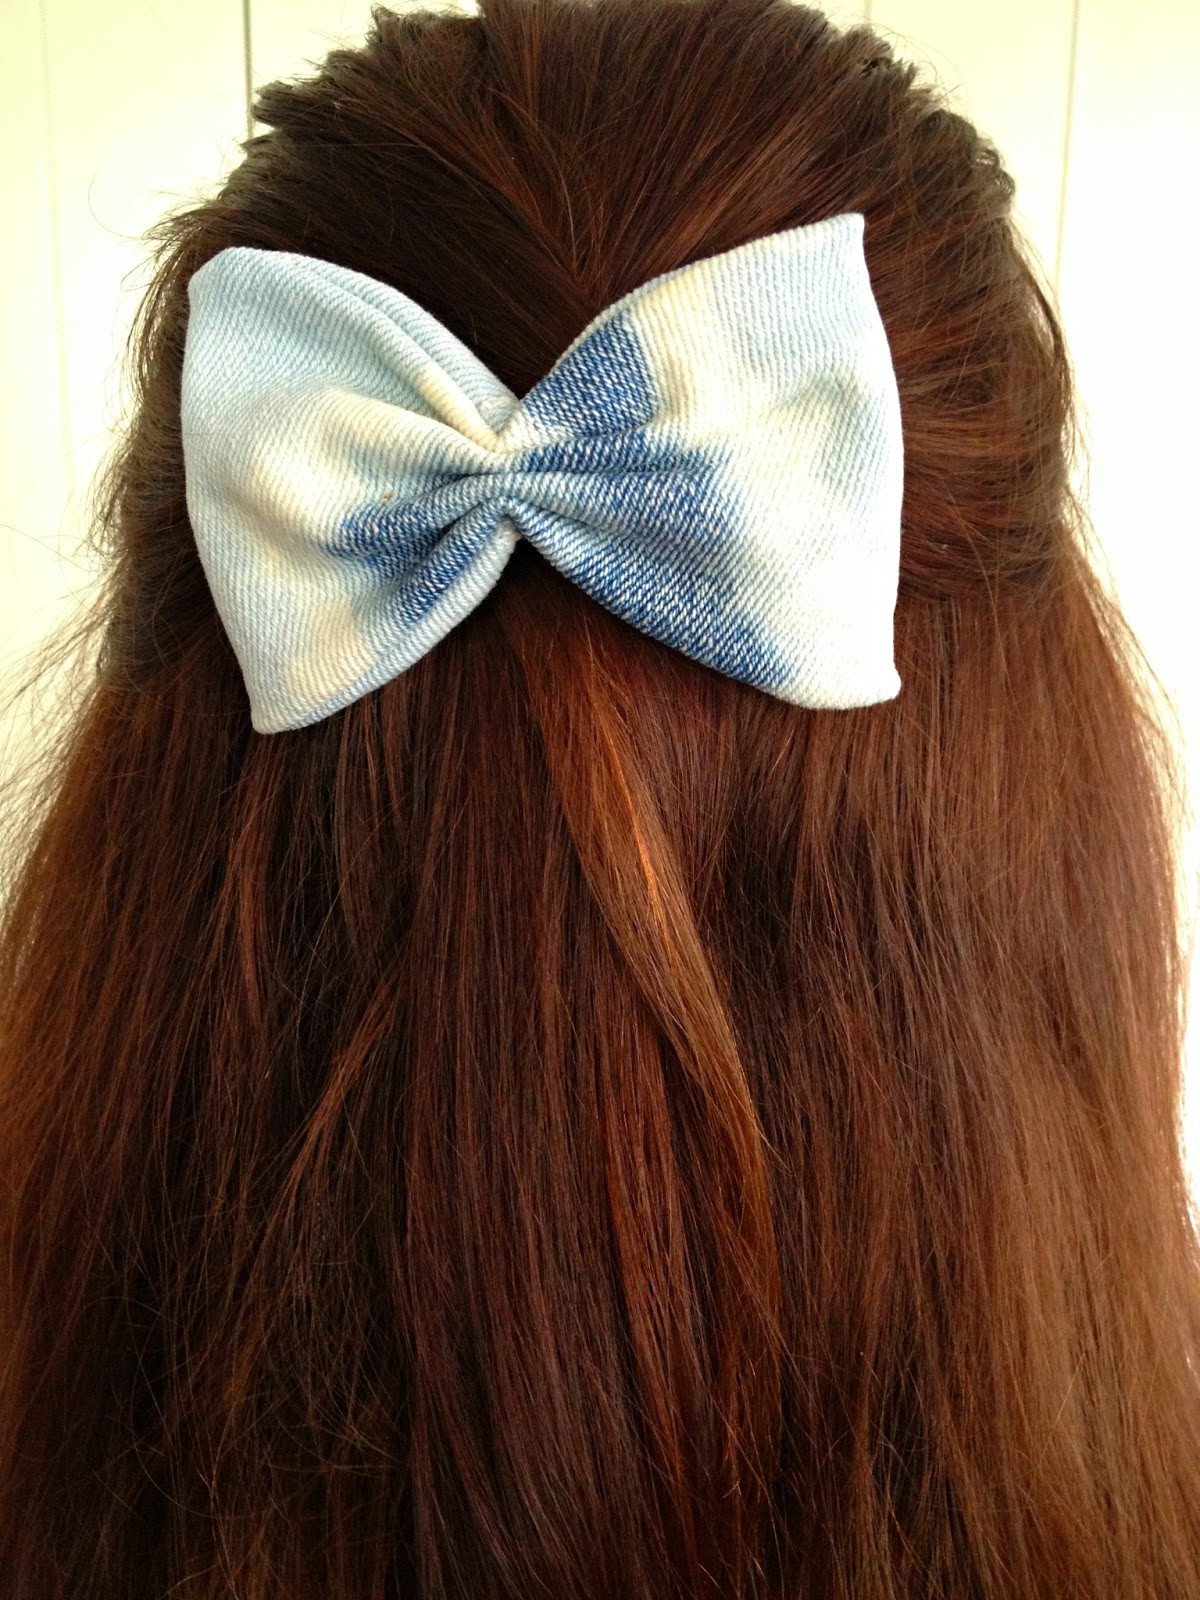 Best ideas about DIY Hair Bow
. Save or Pin Salute to Cute DIY Hair bows Denim scraps tutorial Now.